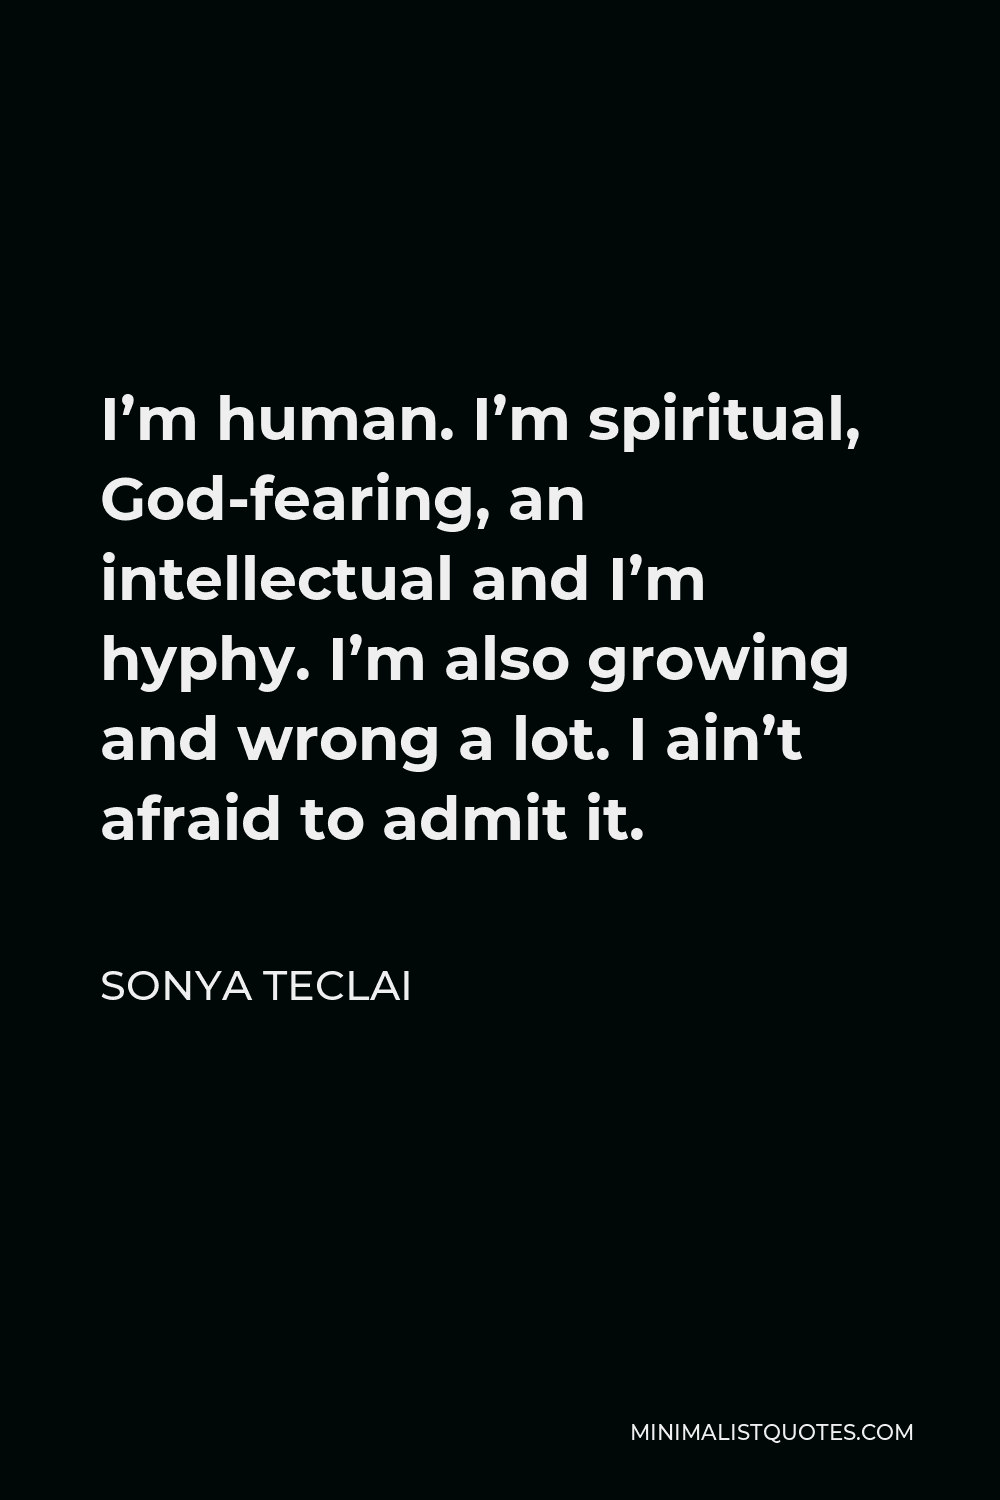 Sonya Teclai Quote - I’m human. I’m spiritual, God-fearing, an intellectual and I’m hyphy. I’m also growing and wrong a lot. I ain’t afraid to admit it.